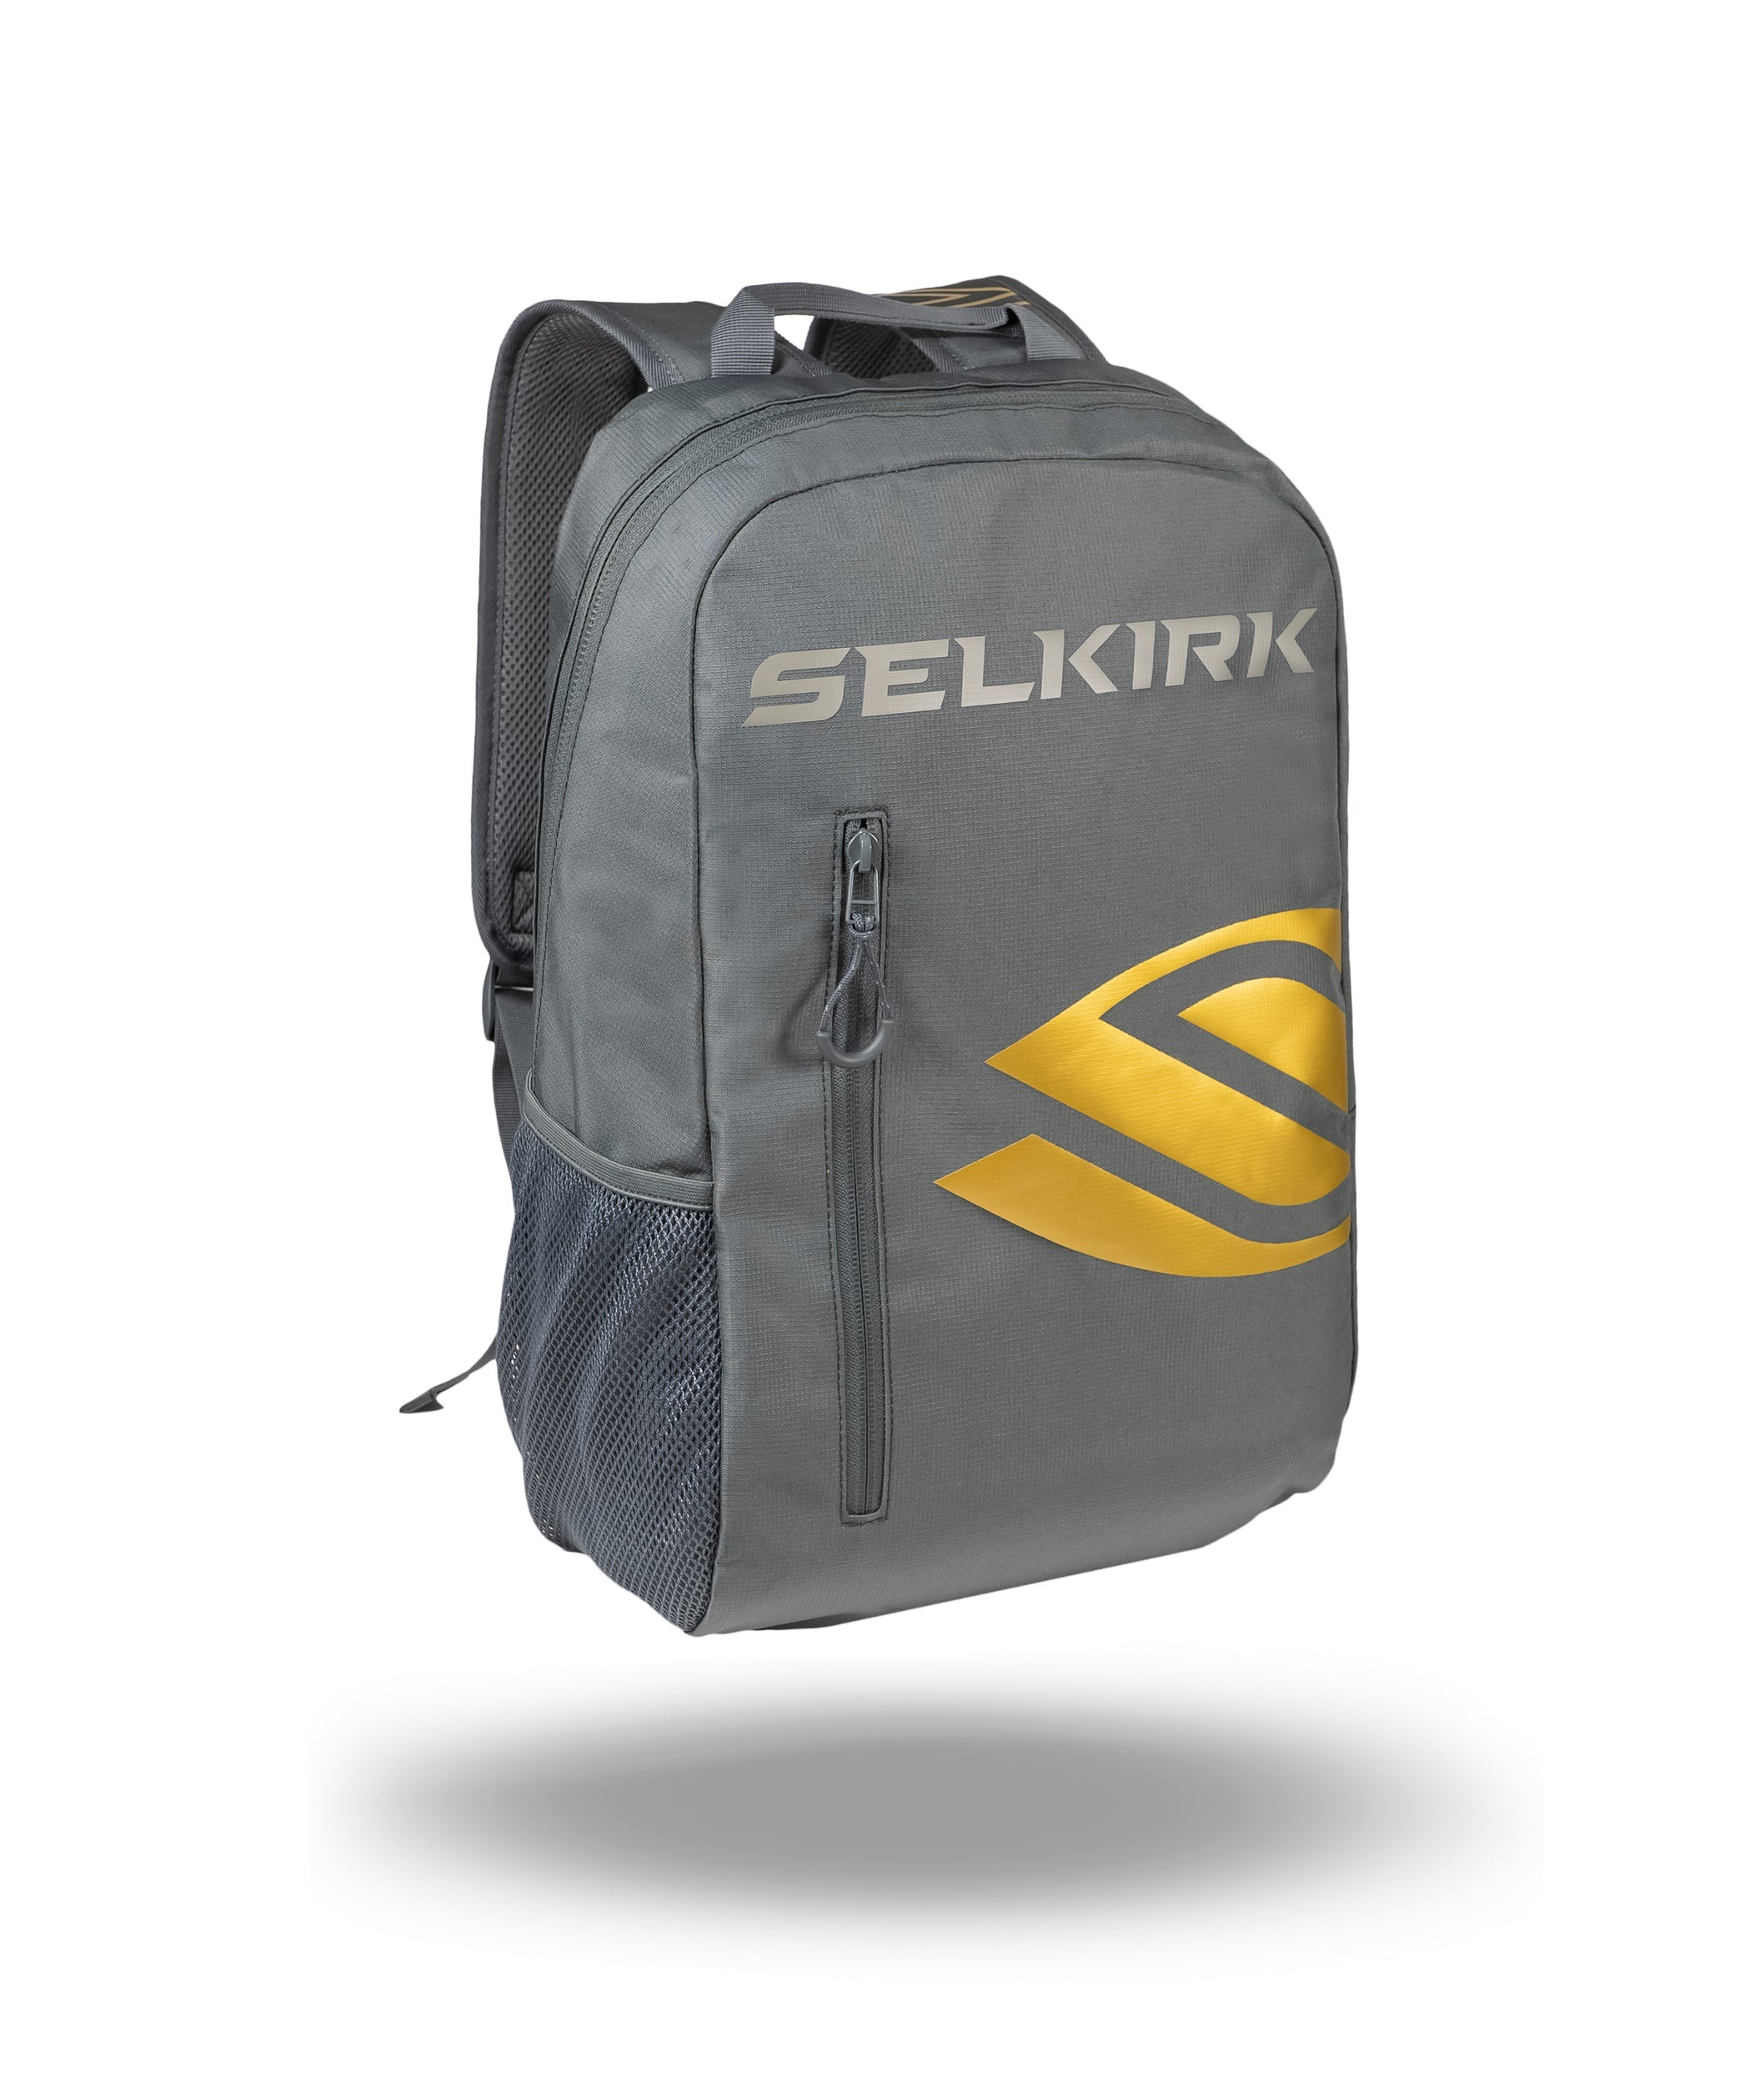 Close-up of the high-quality, premium Selkirk zippers on the pickleball backpack.